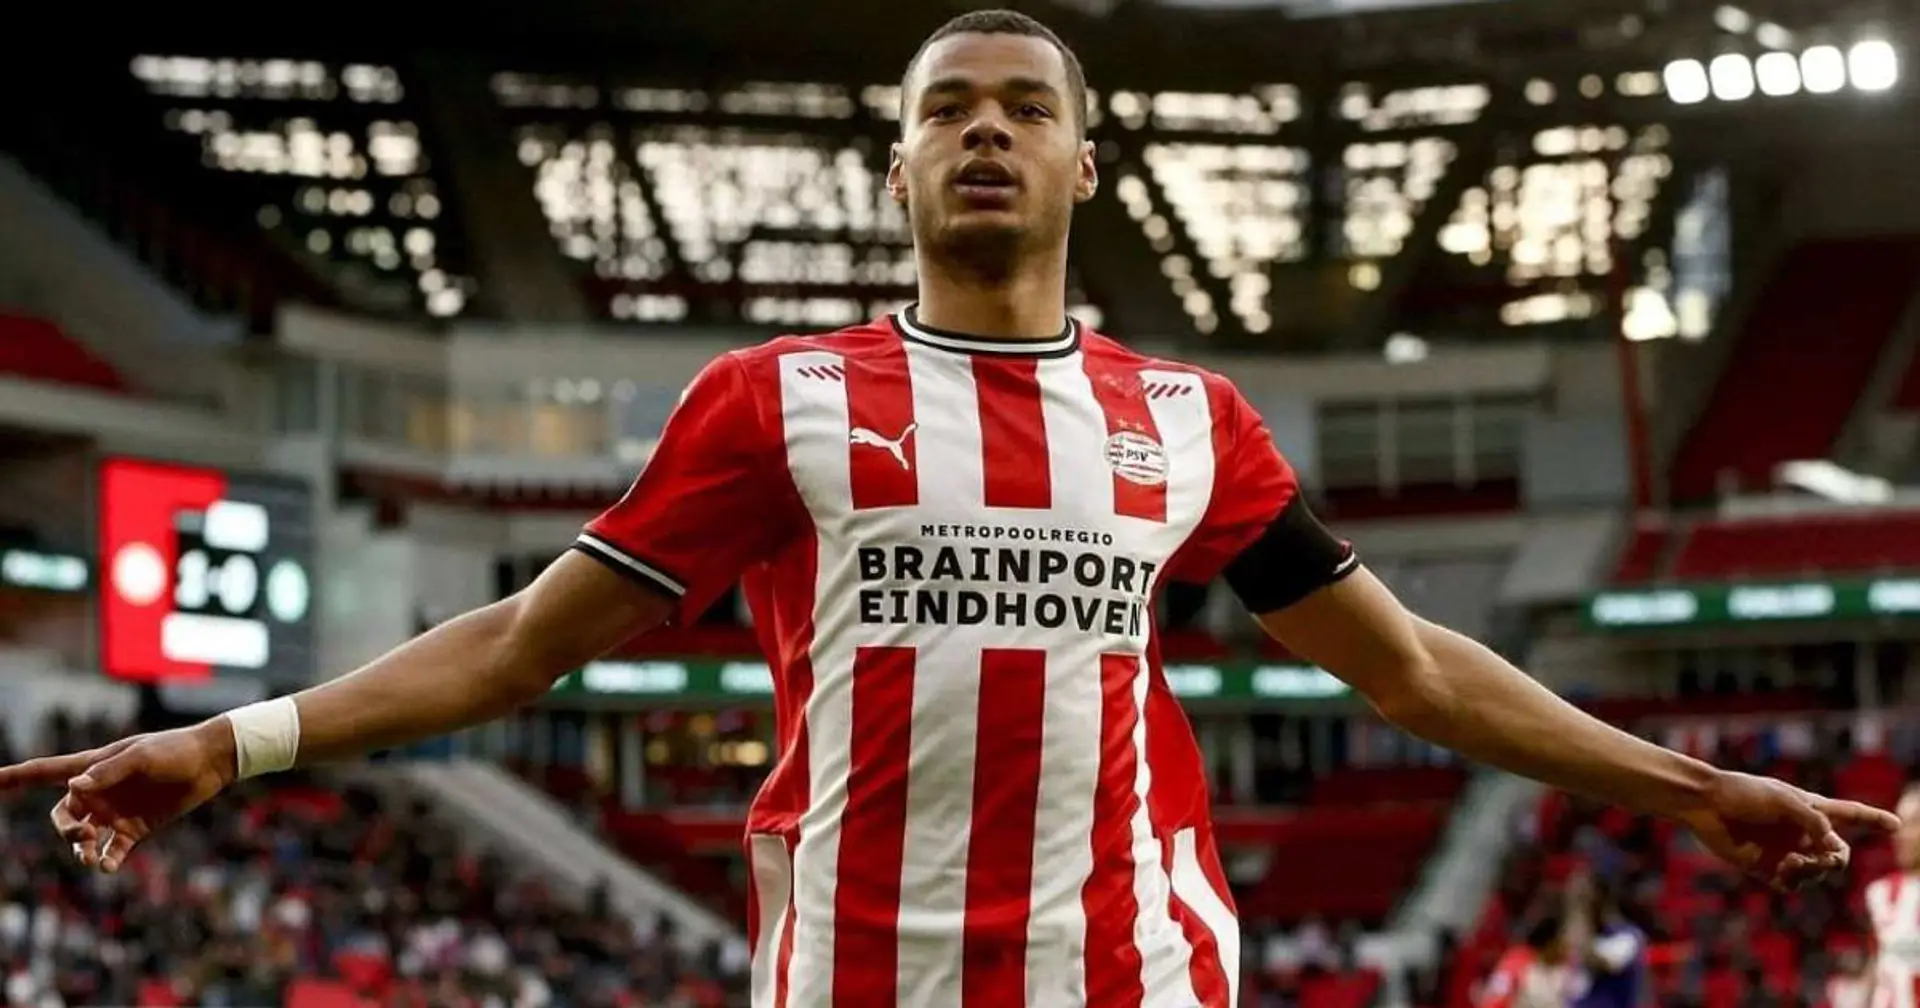 Man United interested in signing PSV forward Cody Gakpo – he’s been compared to Van Nistelrooy (reliability: 4 stars)